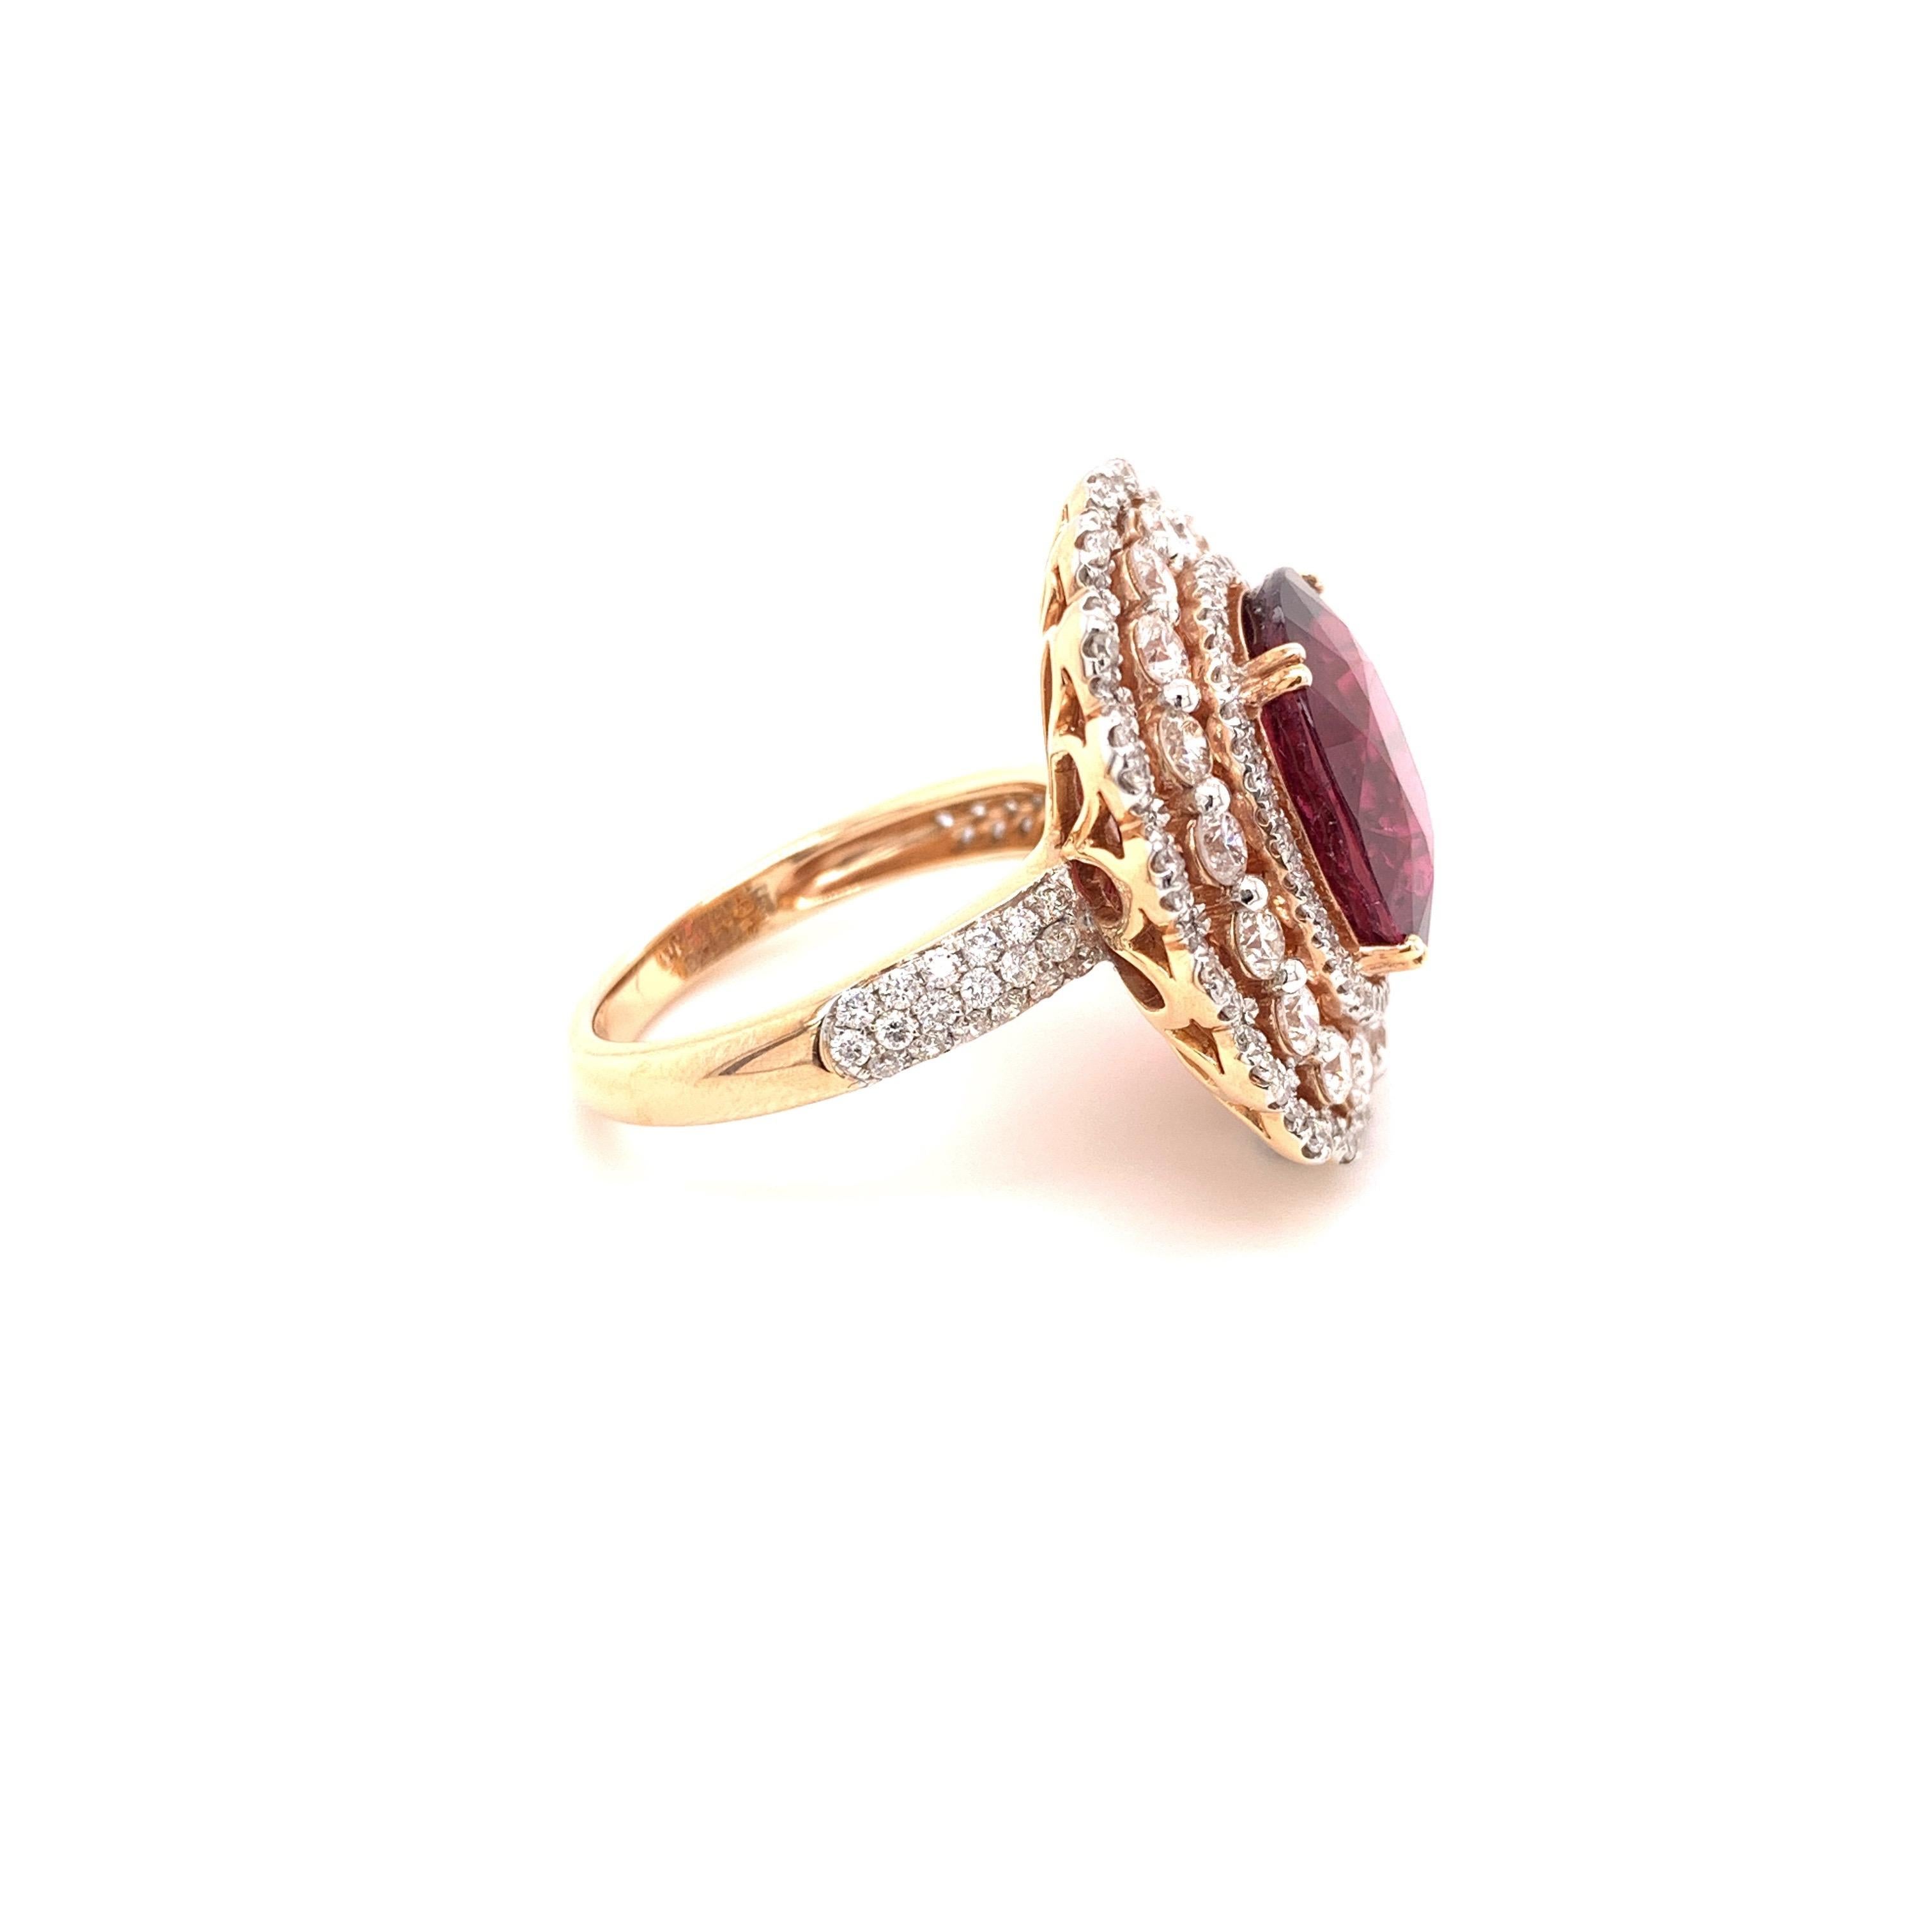 Contemporary 7.87 Carat Tourmaline 'Rubellite' Cocktail Ring For Sale